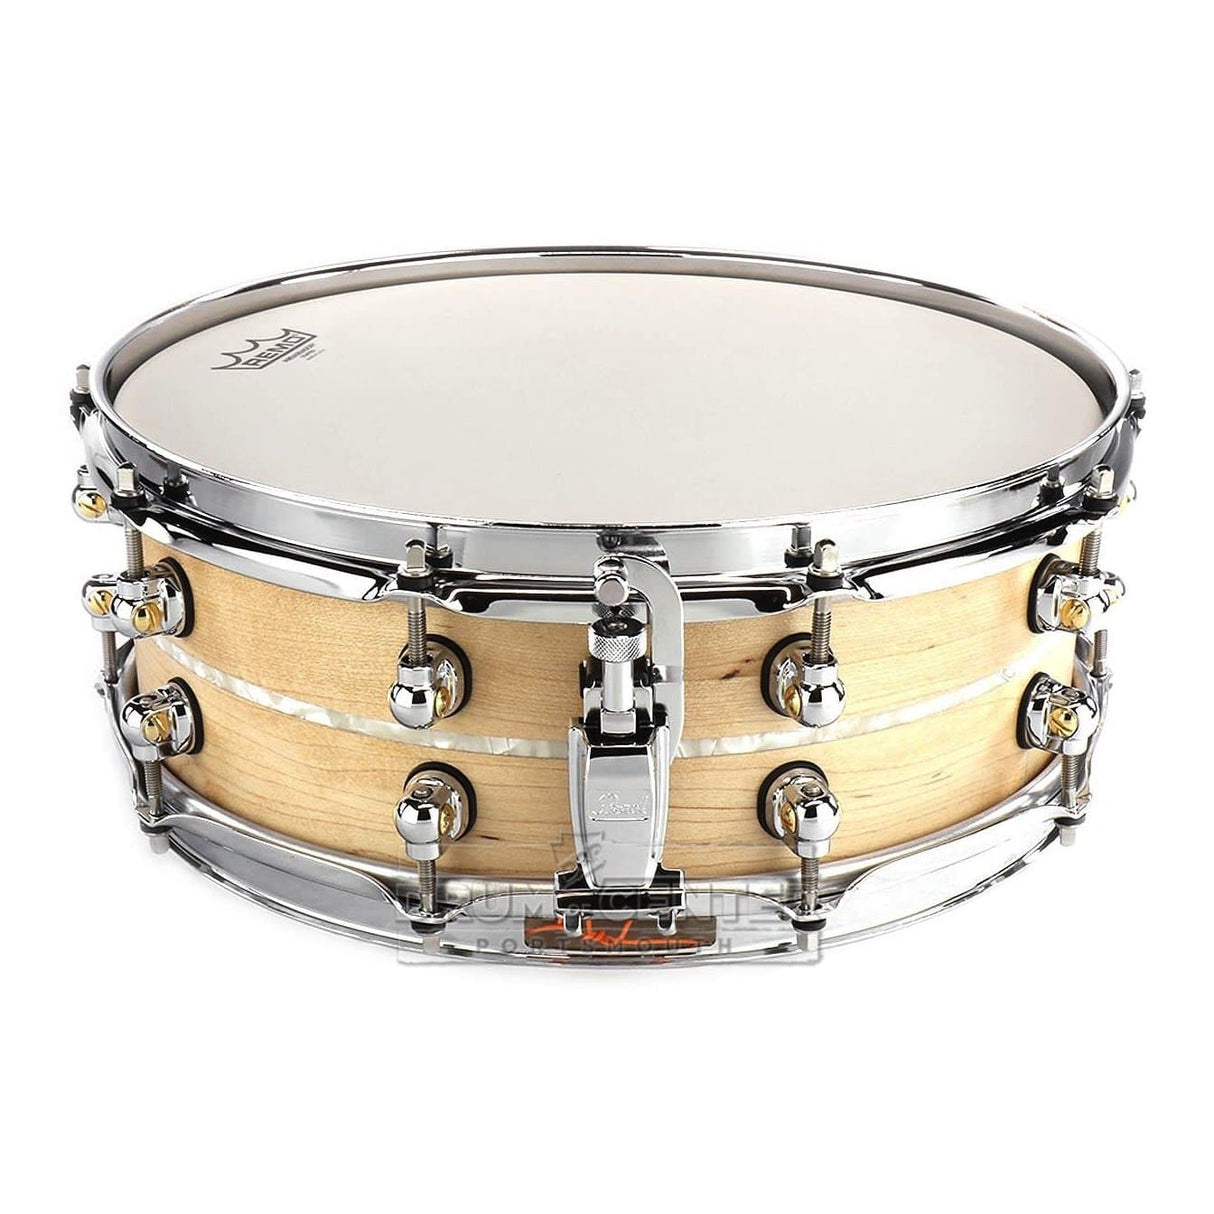 Pearl Music City Custom Solid Maple 14x5 Snare Drum - Natural With Marine Pearl Inlay